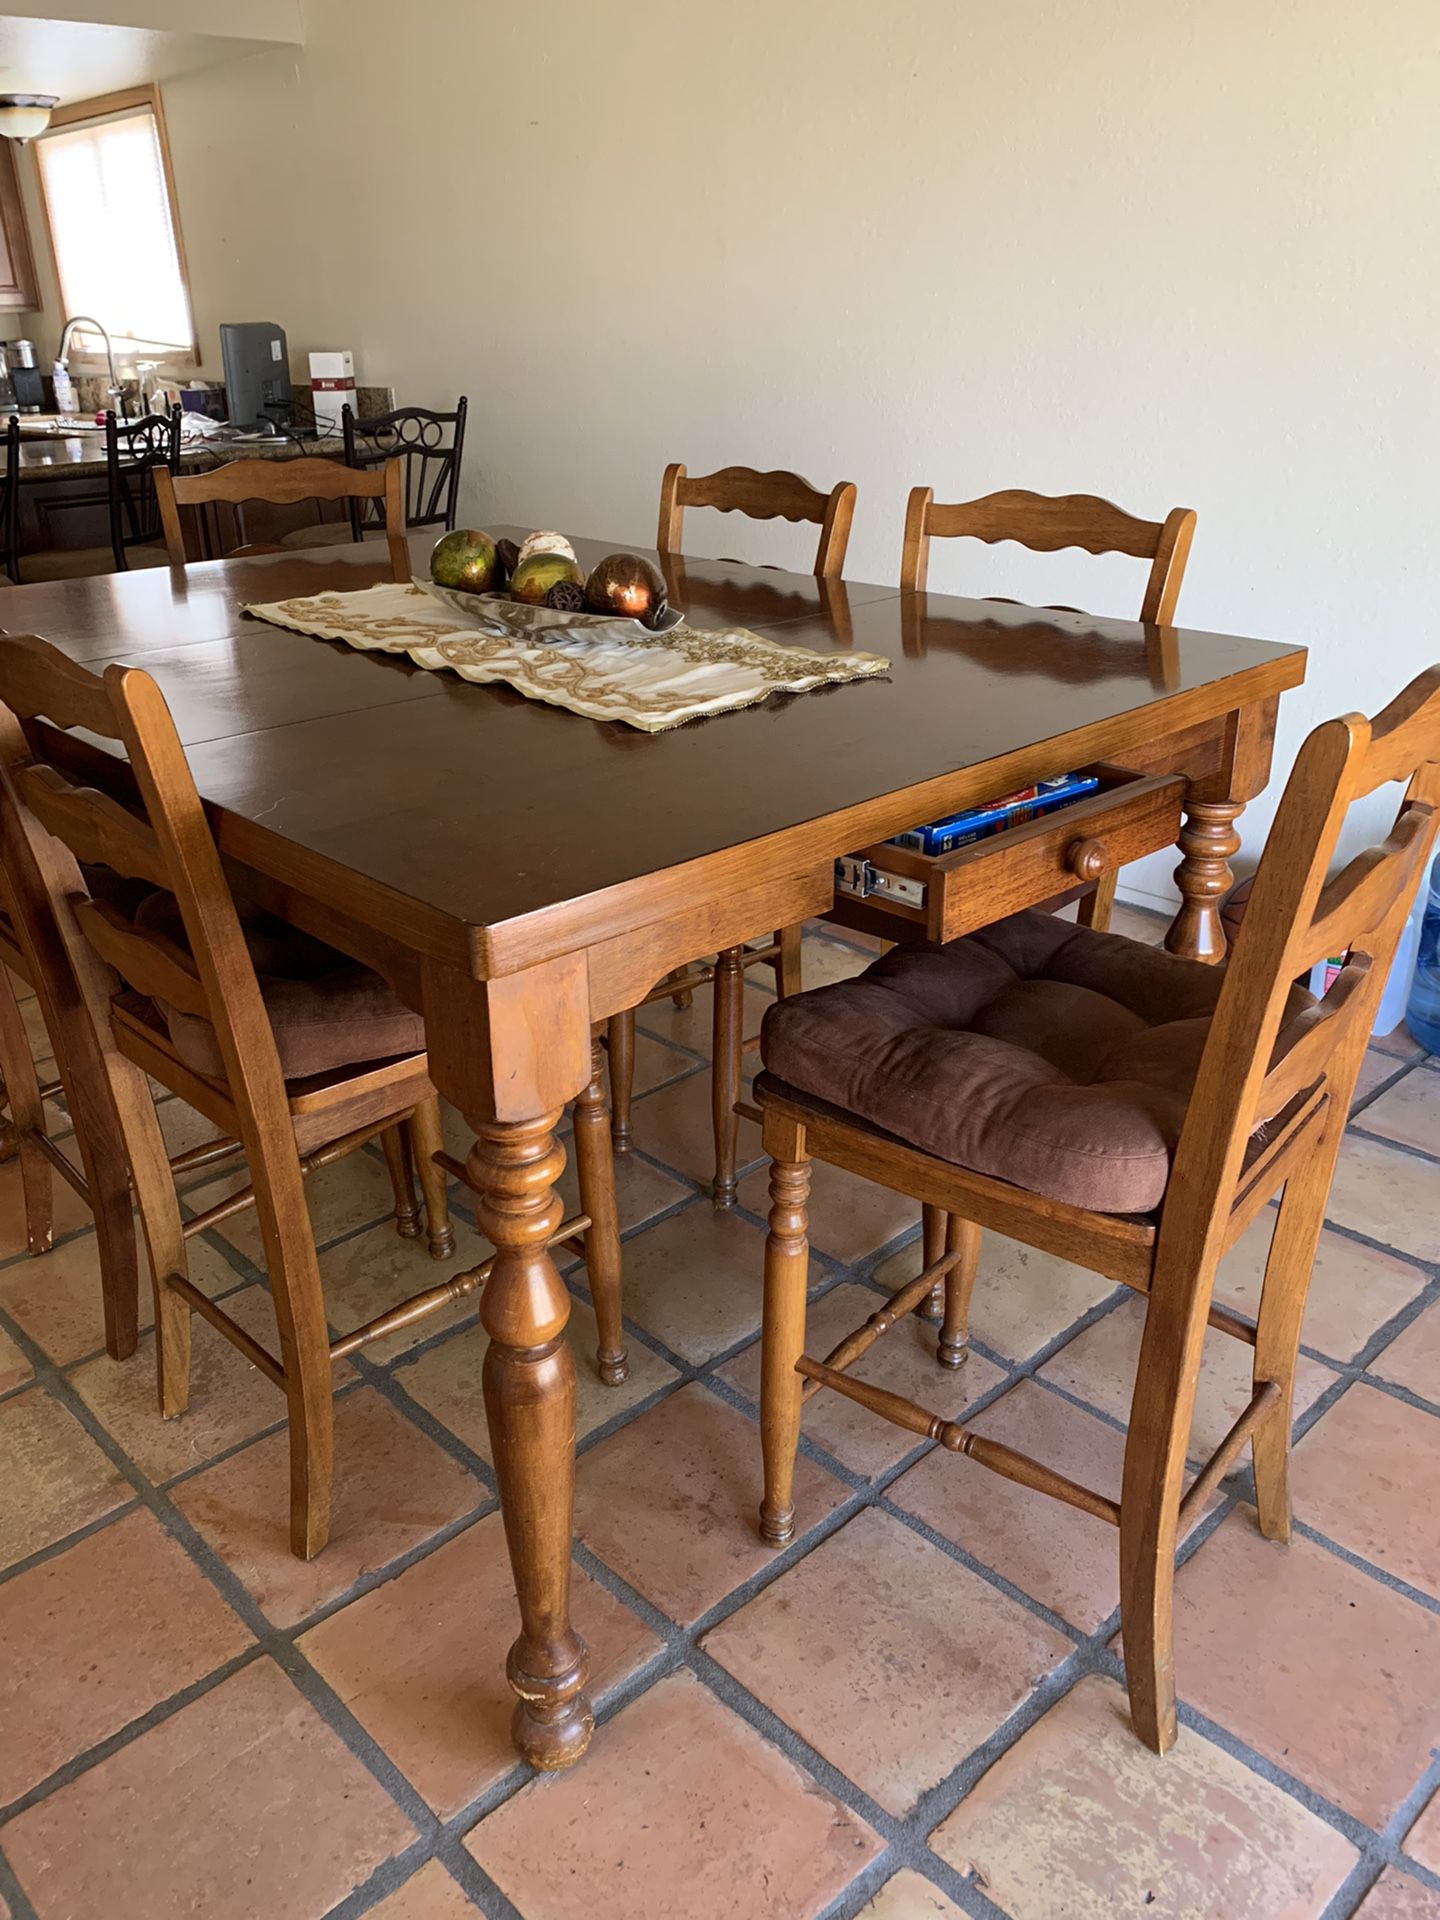 Non Smoking Home Counter Top table 6 Chairs With Cushions